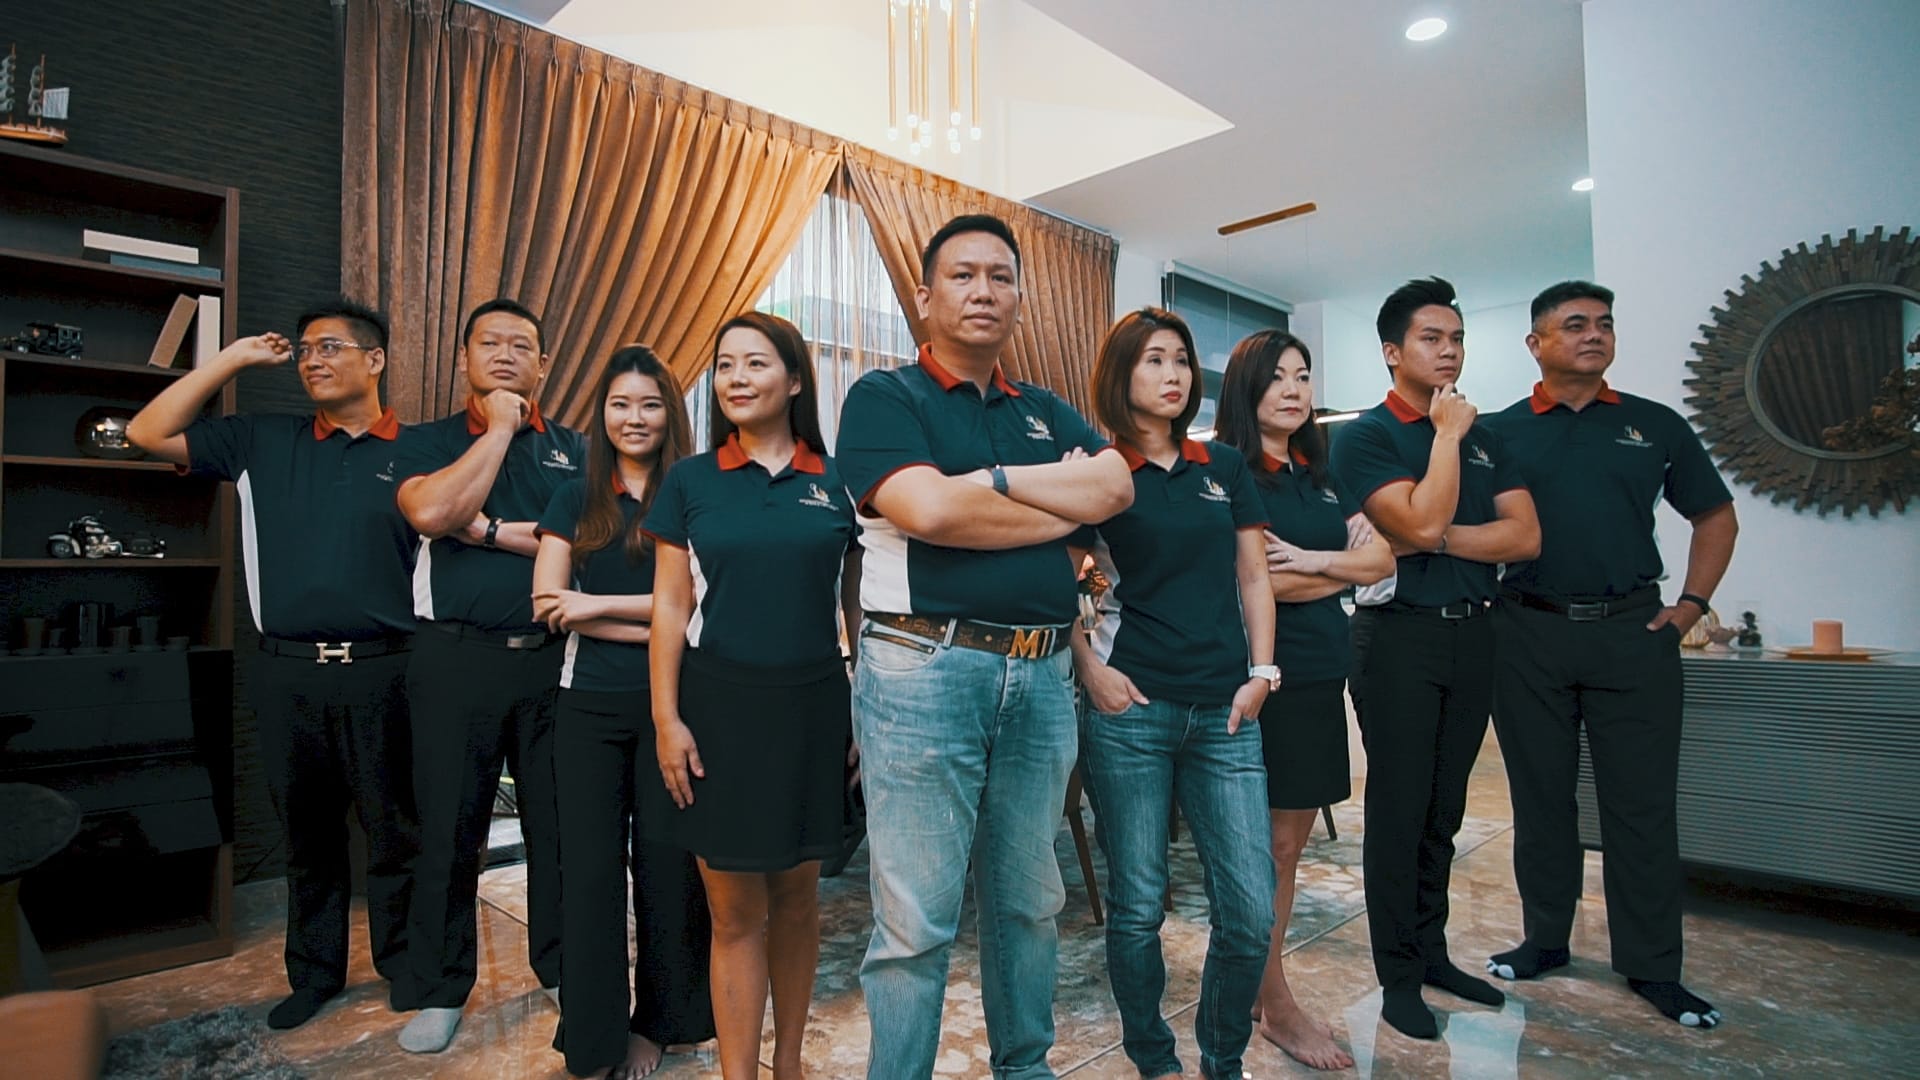 property agents of slc team standing in formation